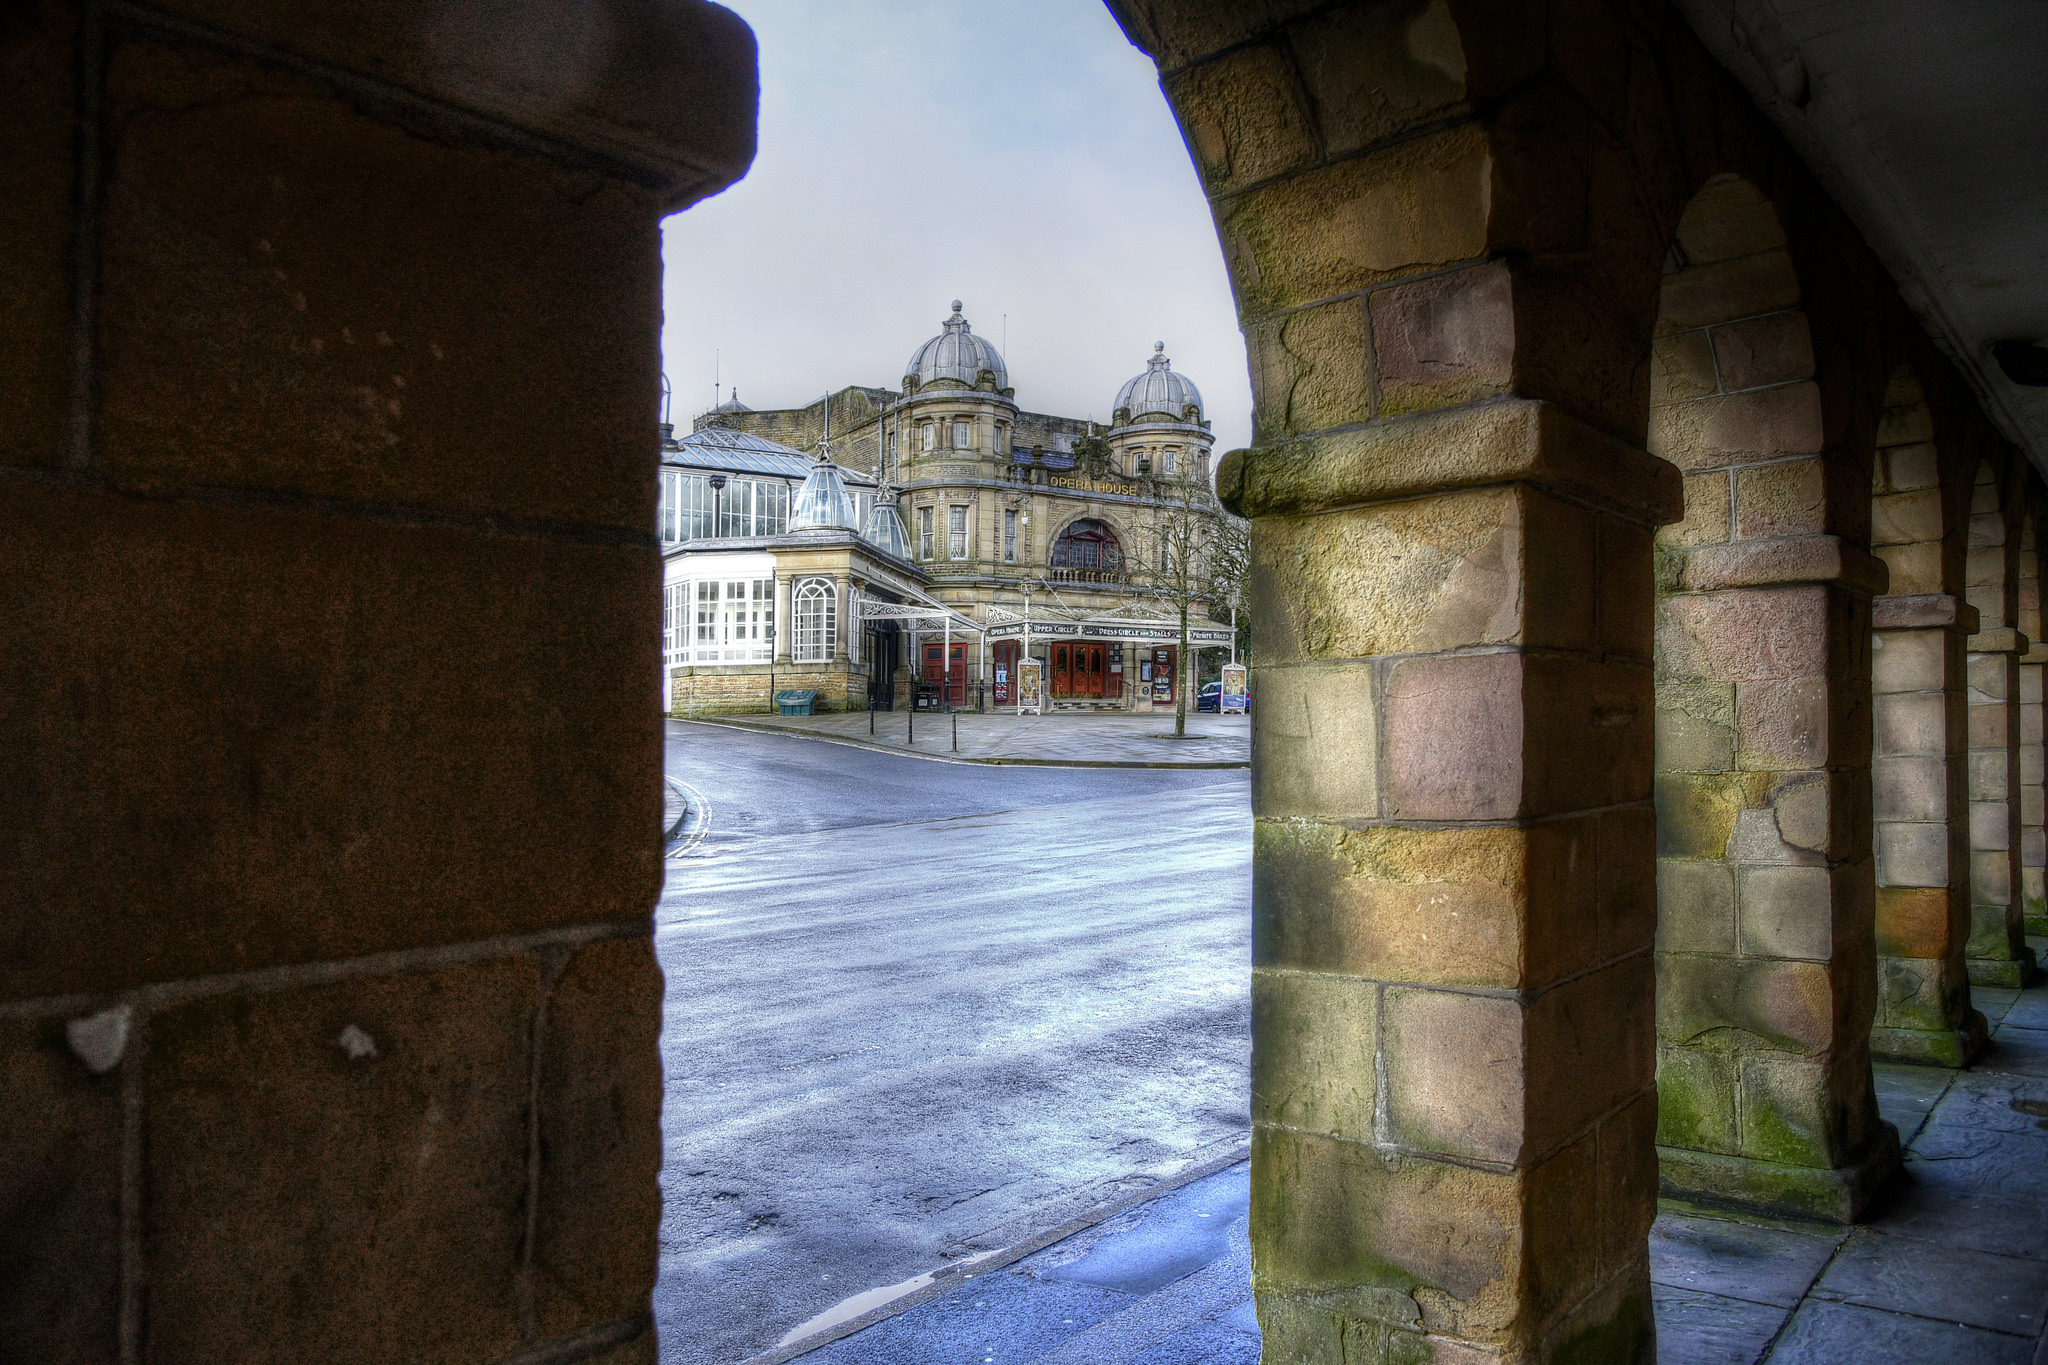 A view of Buxton Opera House from behind the arches on The Square